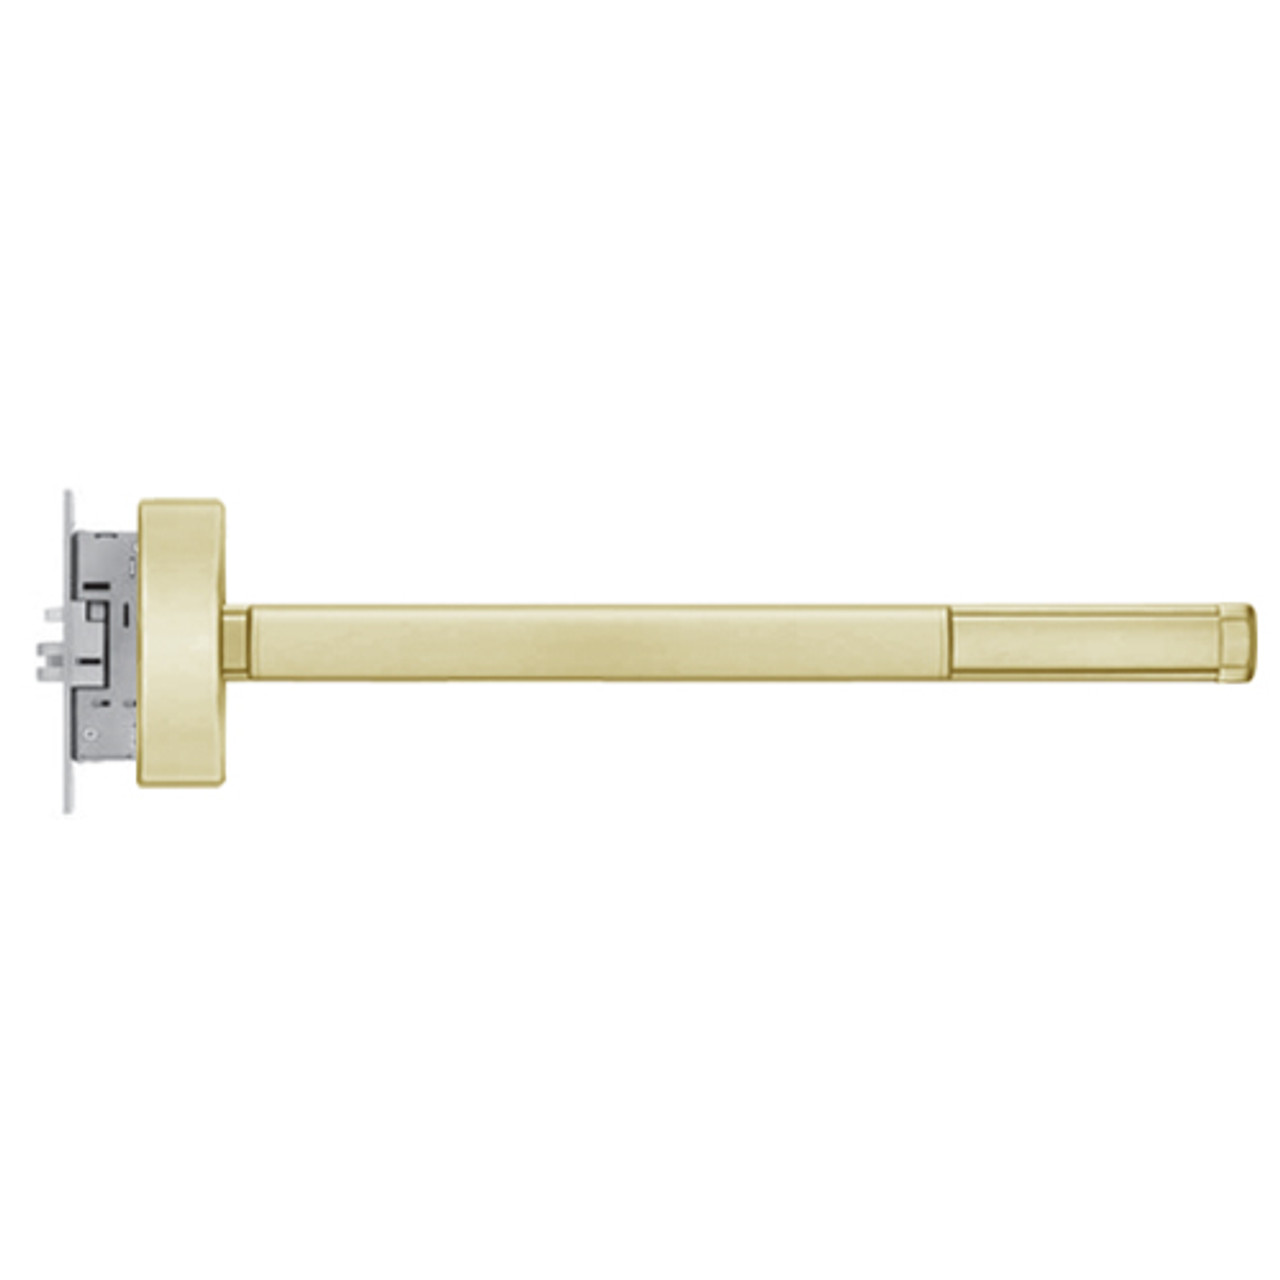 MLRFL2303-RHR-606-36 PHI 2300 Series Fire Rated Apex Mortise Exit Device with Motorized Latch Retraction Prepped for Key Retracts Latchbolt in Satin Brass Finish